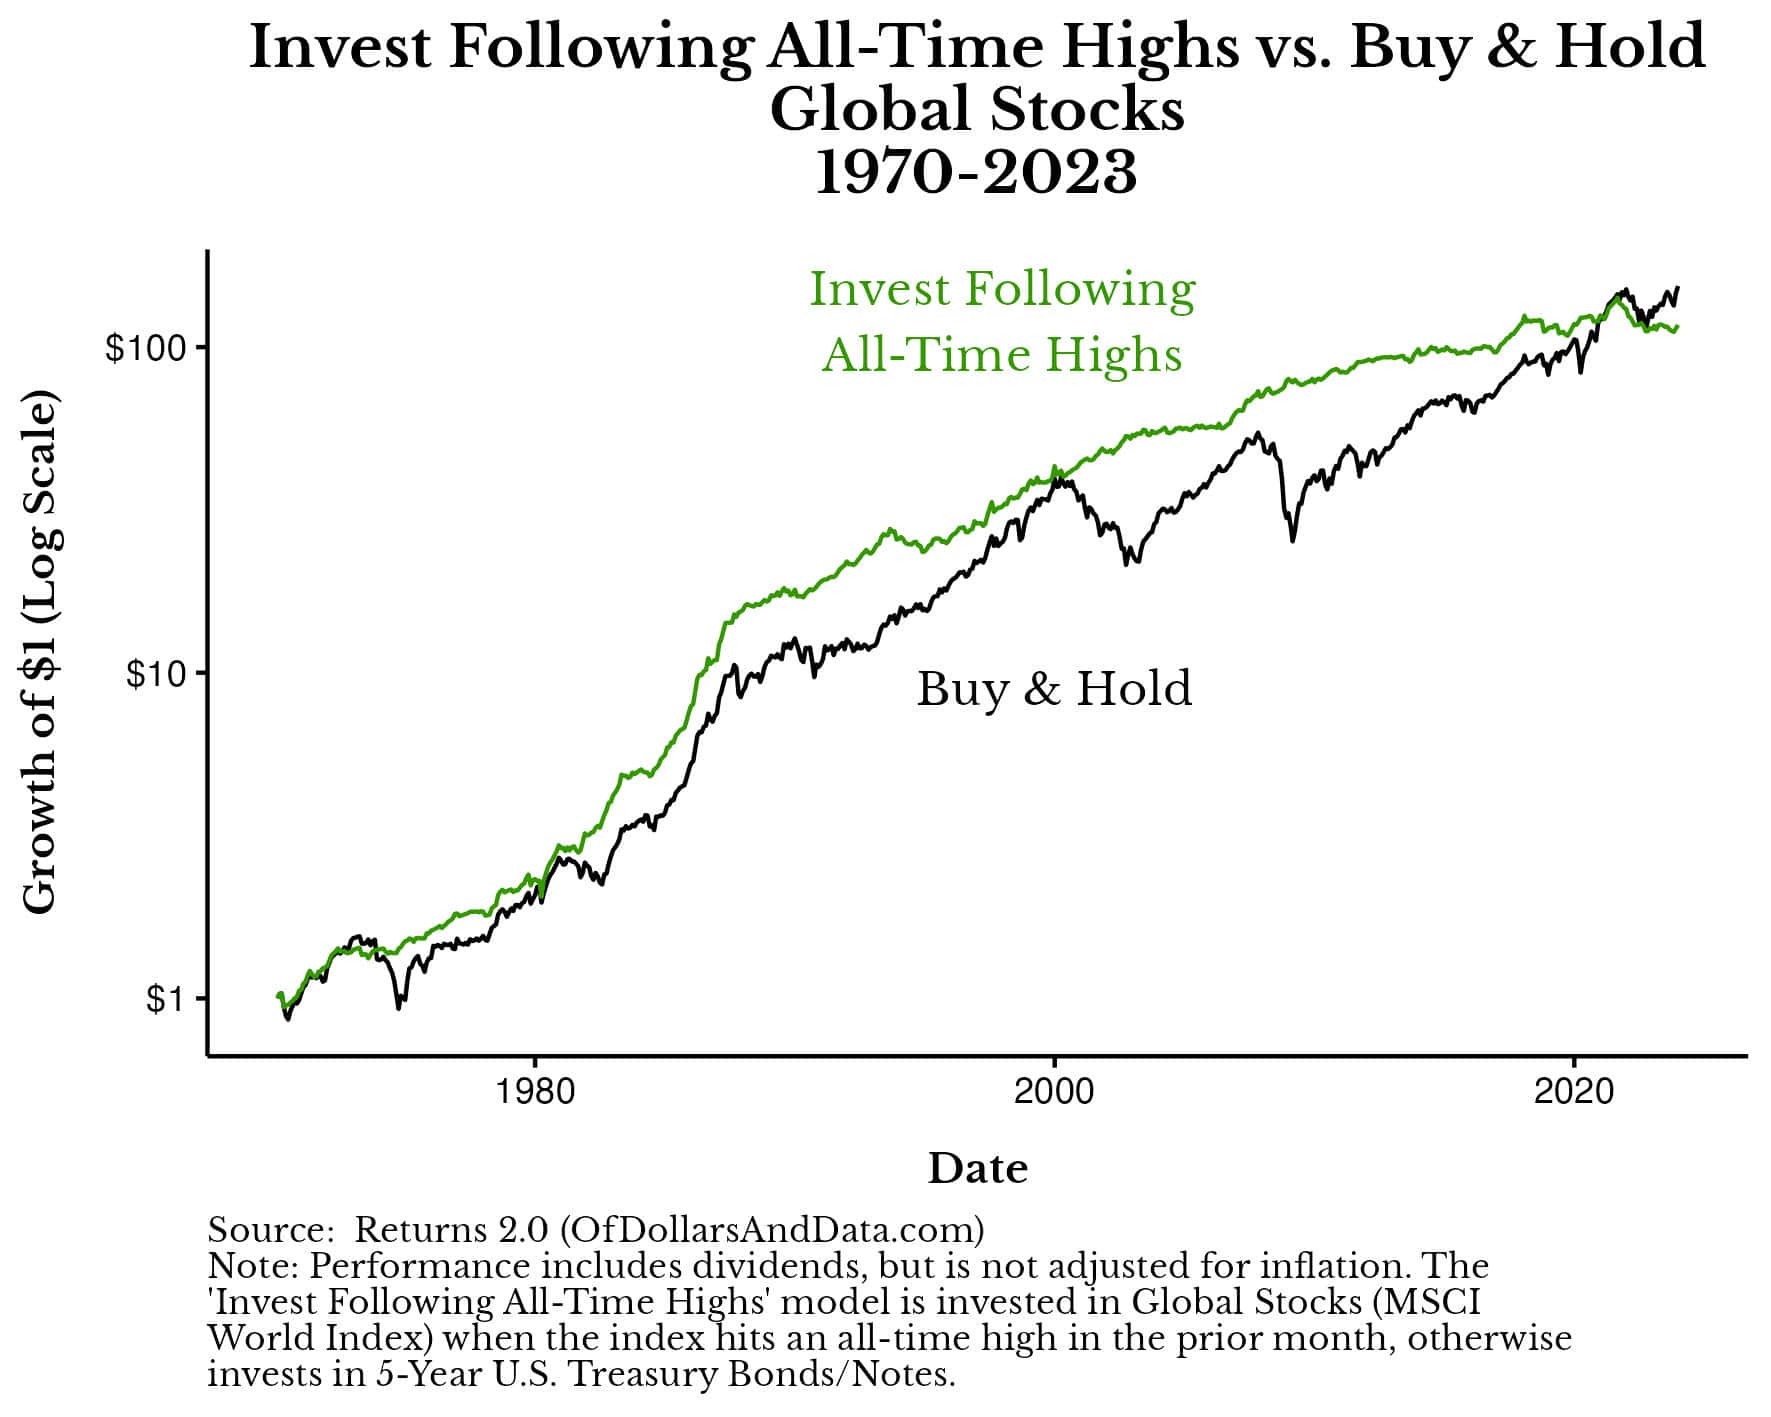 Comparing a Buy & Hold global stock strategy vs. a strategy that invests in global stocks only in months following all-time highs otherwise it is invested in U.S. bonds.